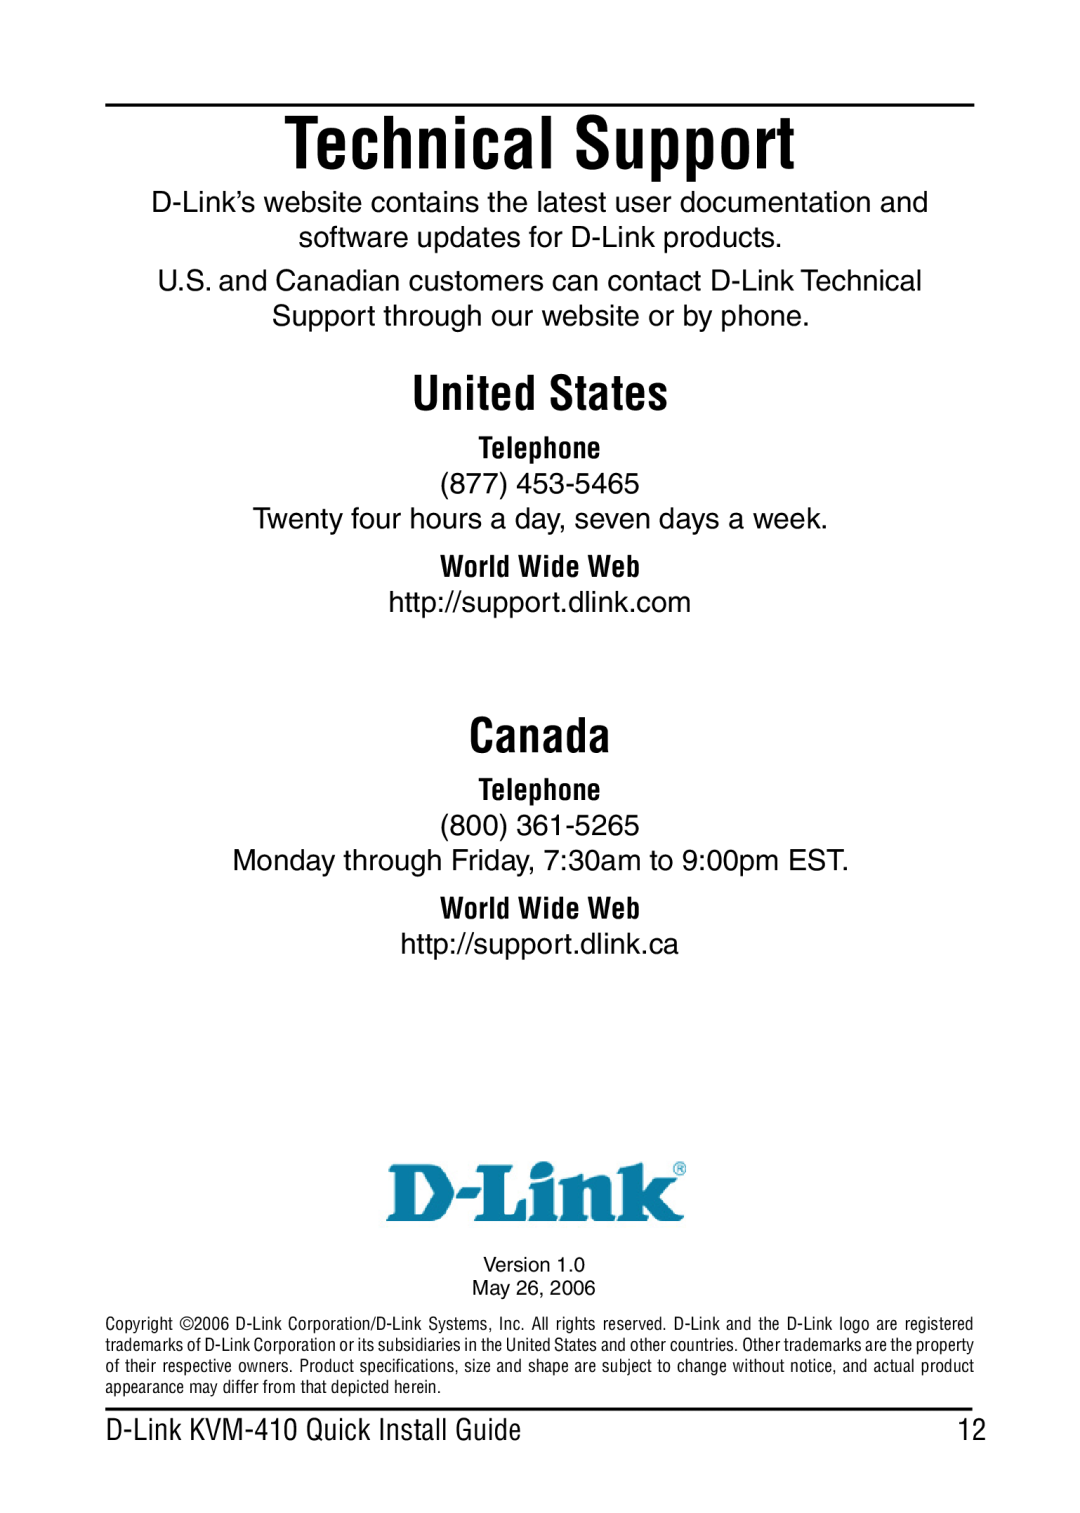 D-Link KVM-410 manual Technical Support, Telephone, World Wide Web, United States, Canada 